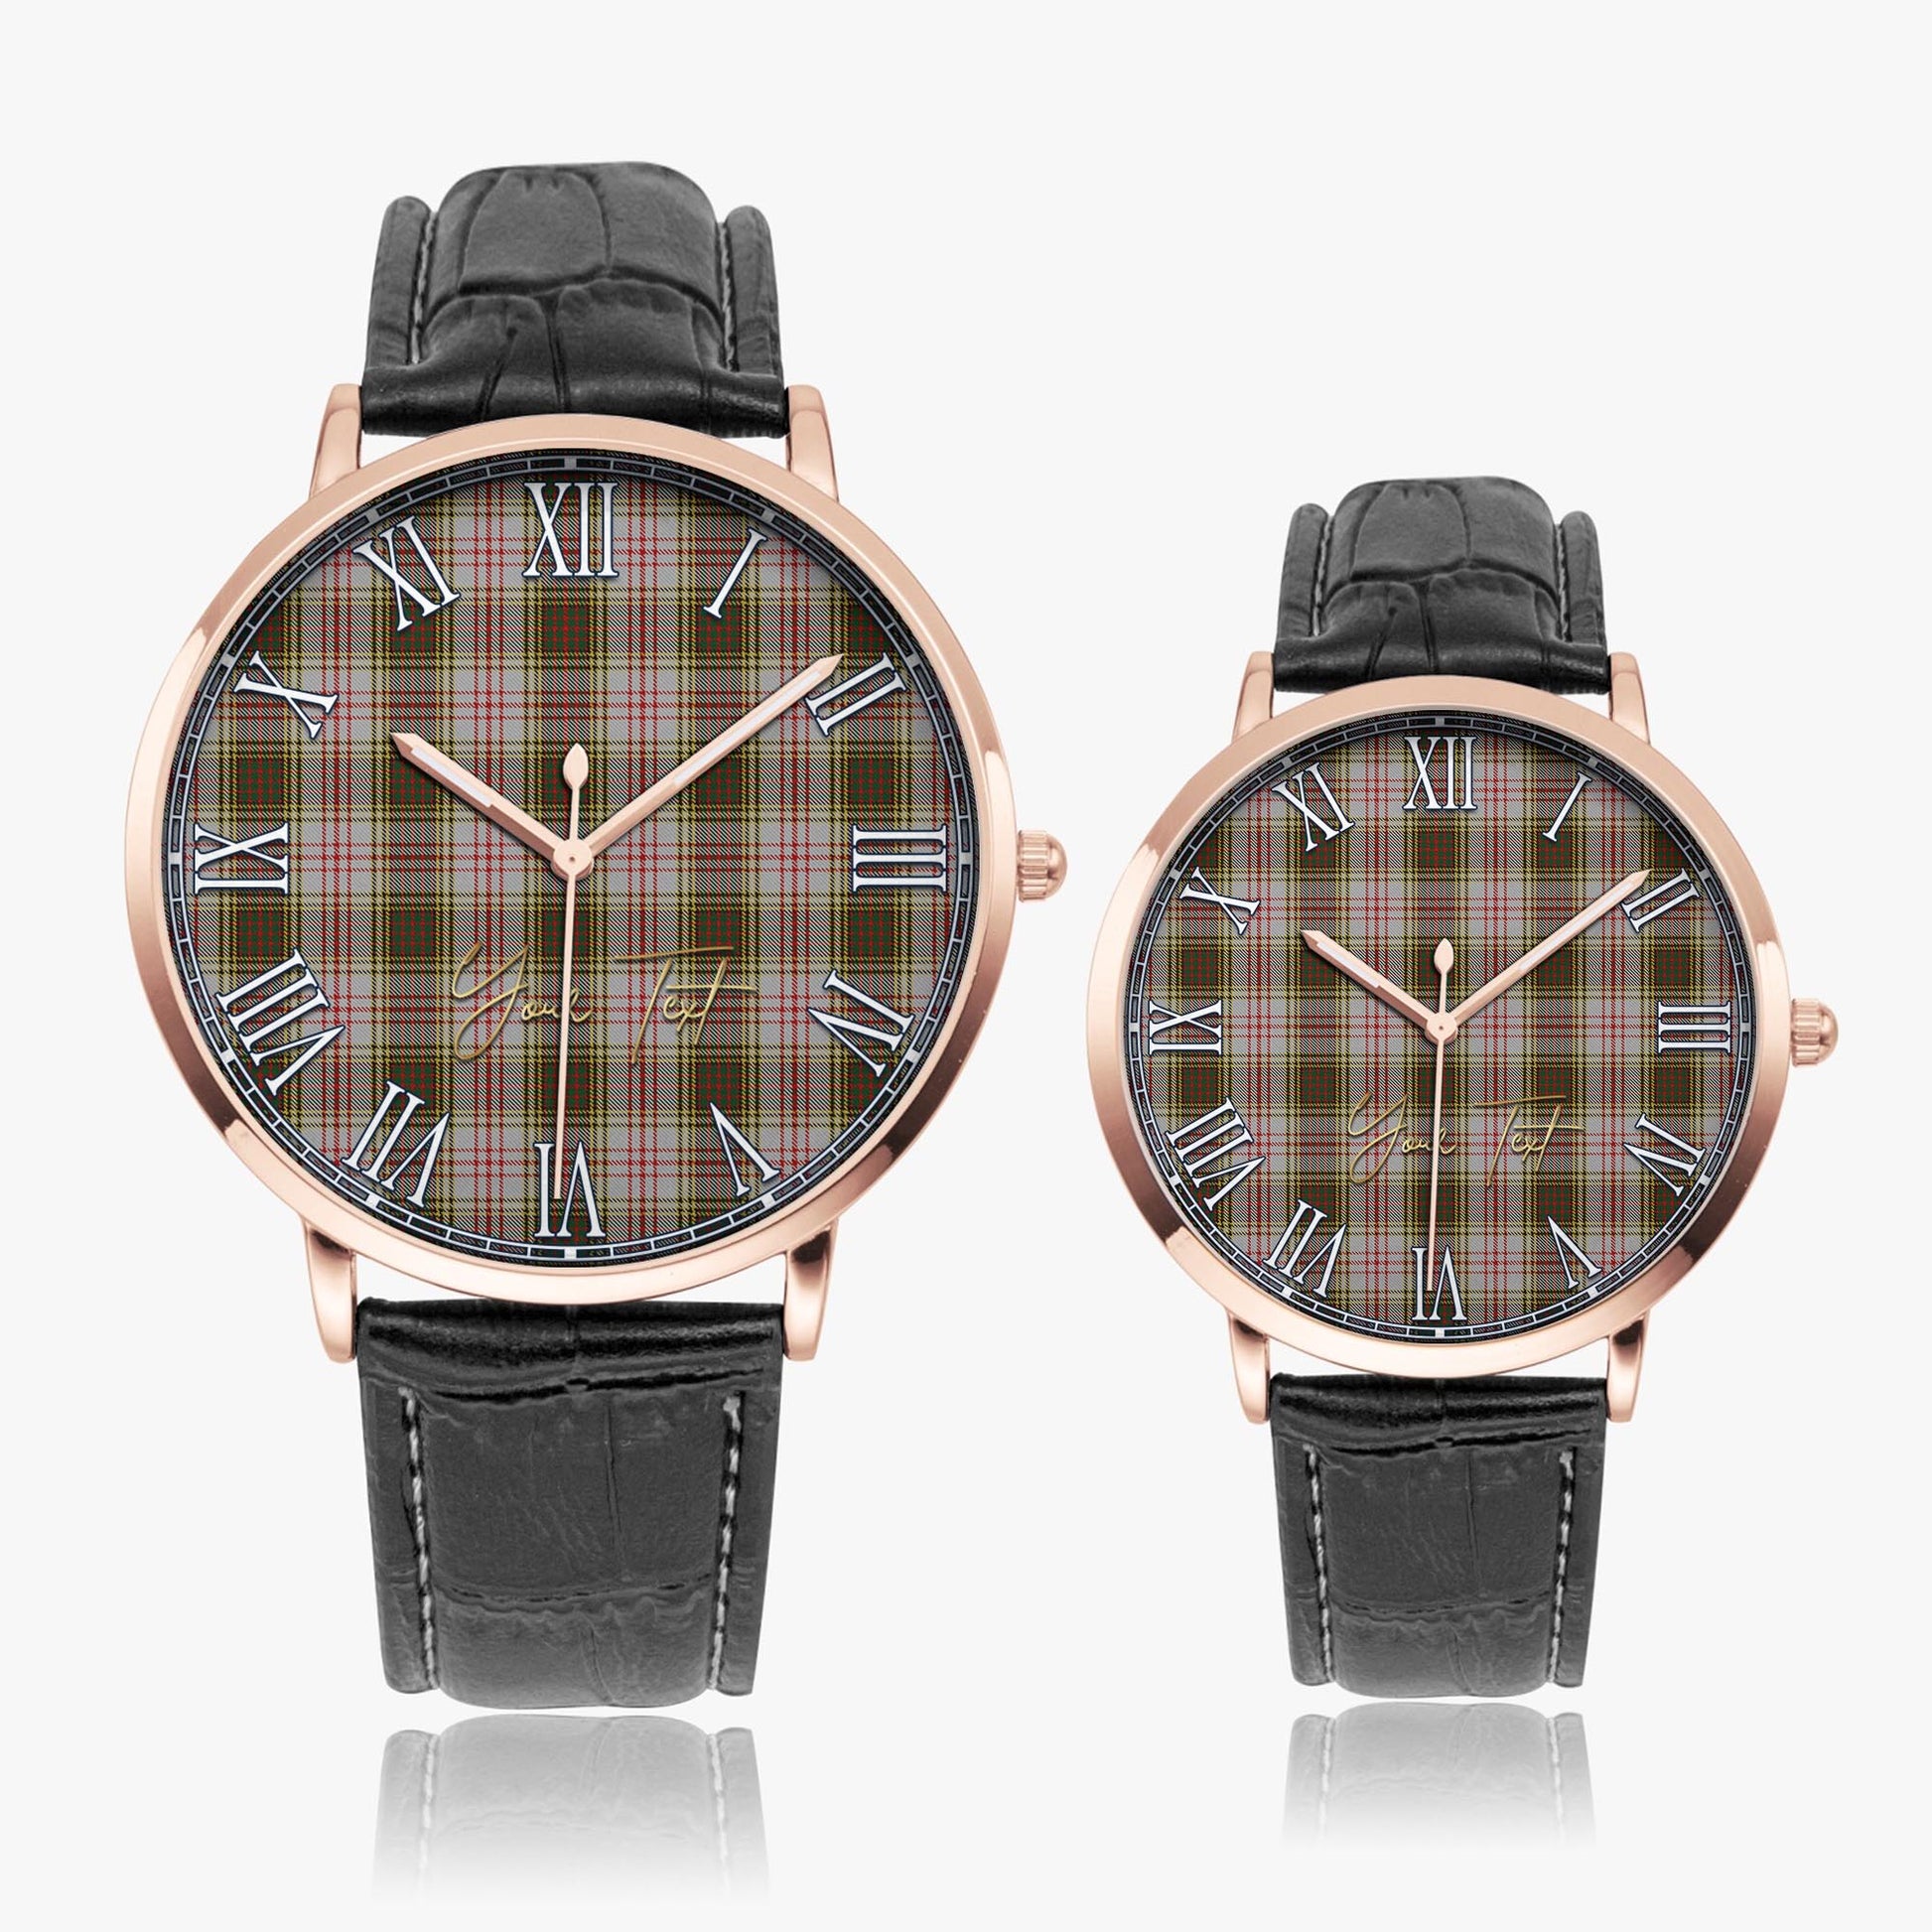 Anderson Dress Tartan Personalized Your Text Leather Trap Quartz Watch Ultra Thin Rose Gold Case With Black Leather Strap - Tartanvibesclothing